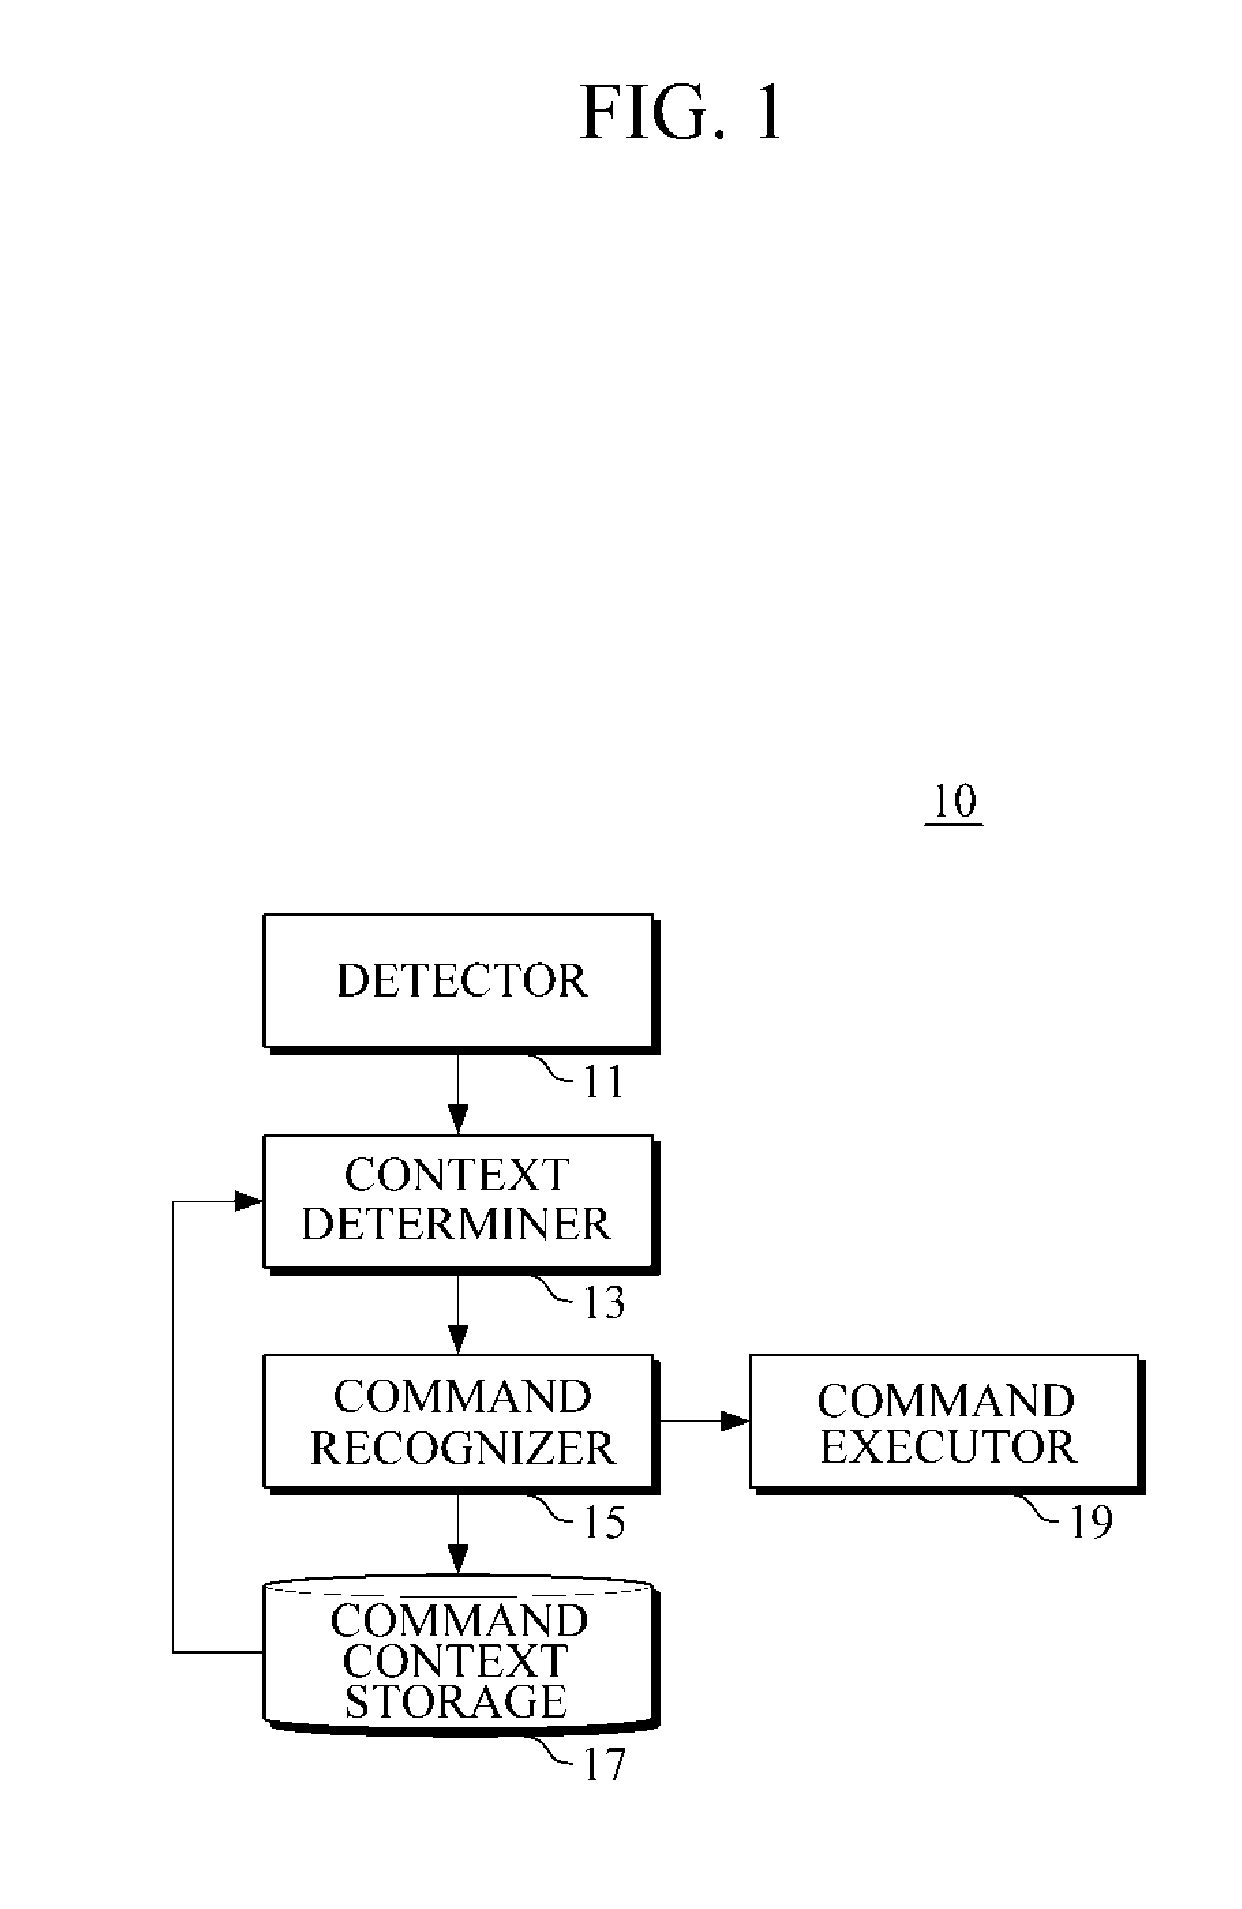 Voice command recognition apparatus and method